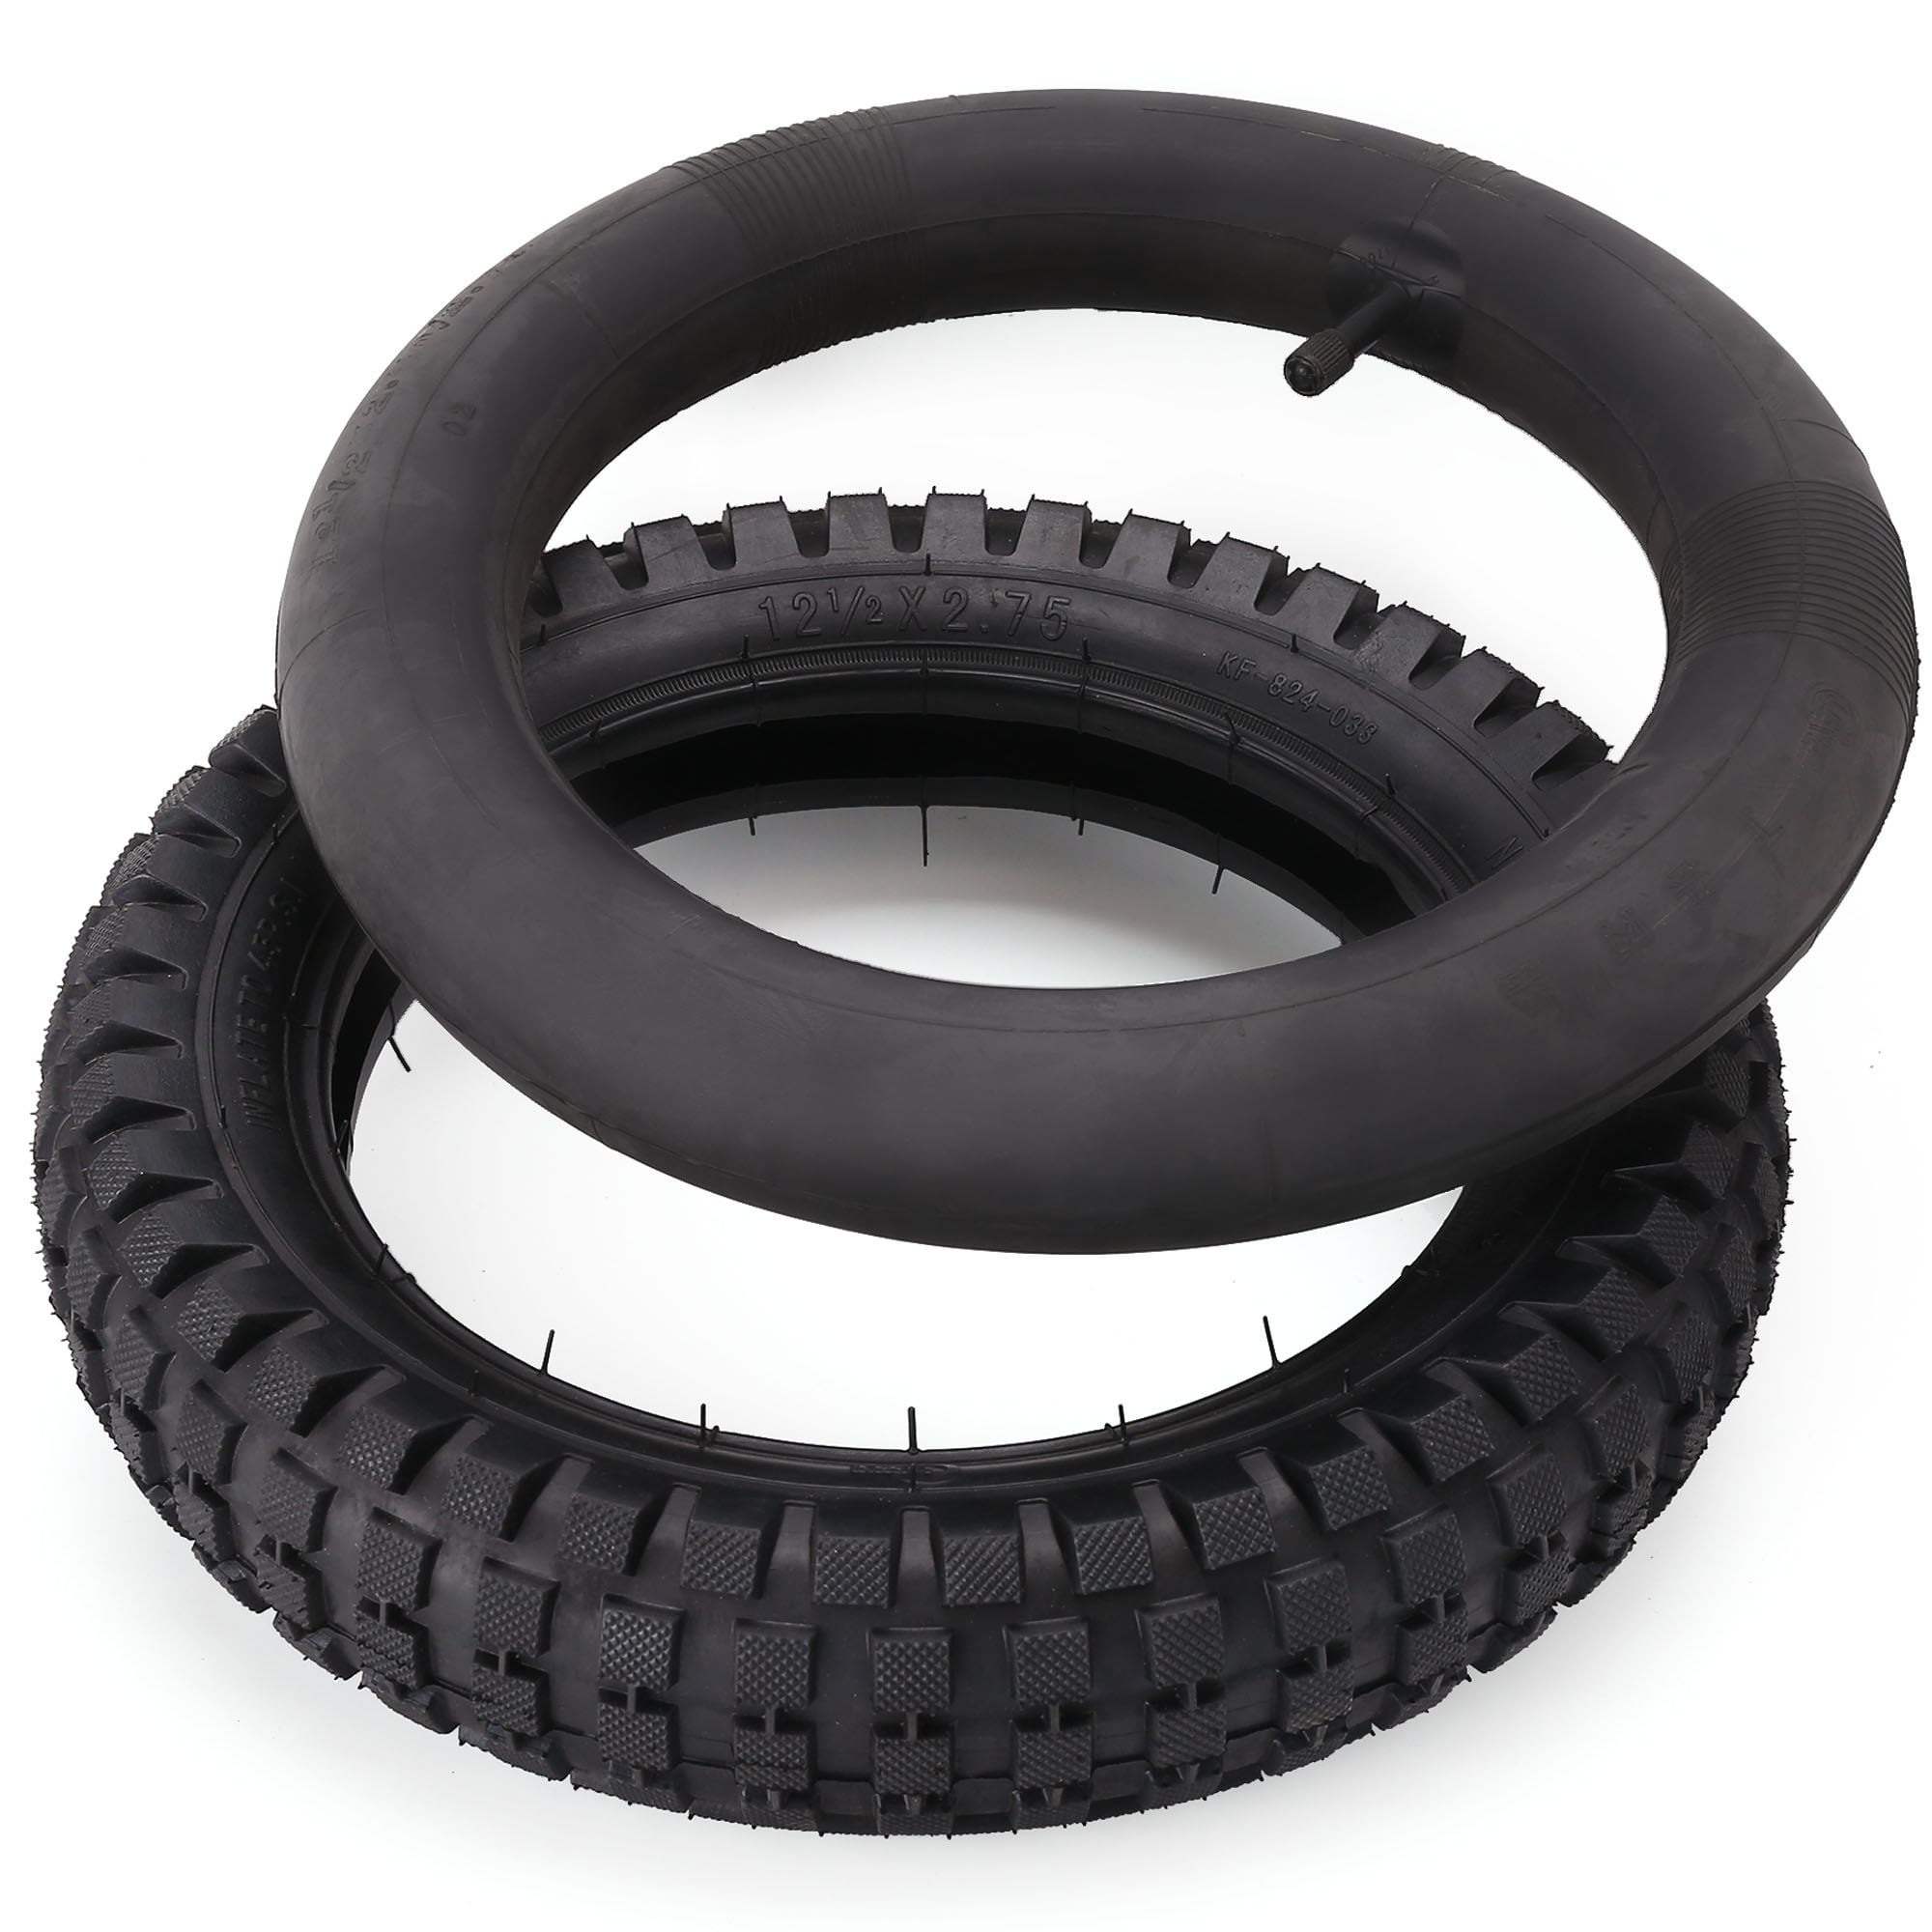 2-Set 50cc 2.75-10 Knobby Tire and Inner Tube Sets Suzuki DRZ70/JR 50 and More Highly Compatible with Honda CRF50/XR50 Replacement Off-road Tires and Tubes for Most 49cc and 70cc Dirt Bikes 